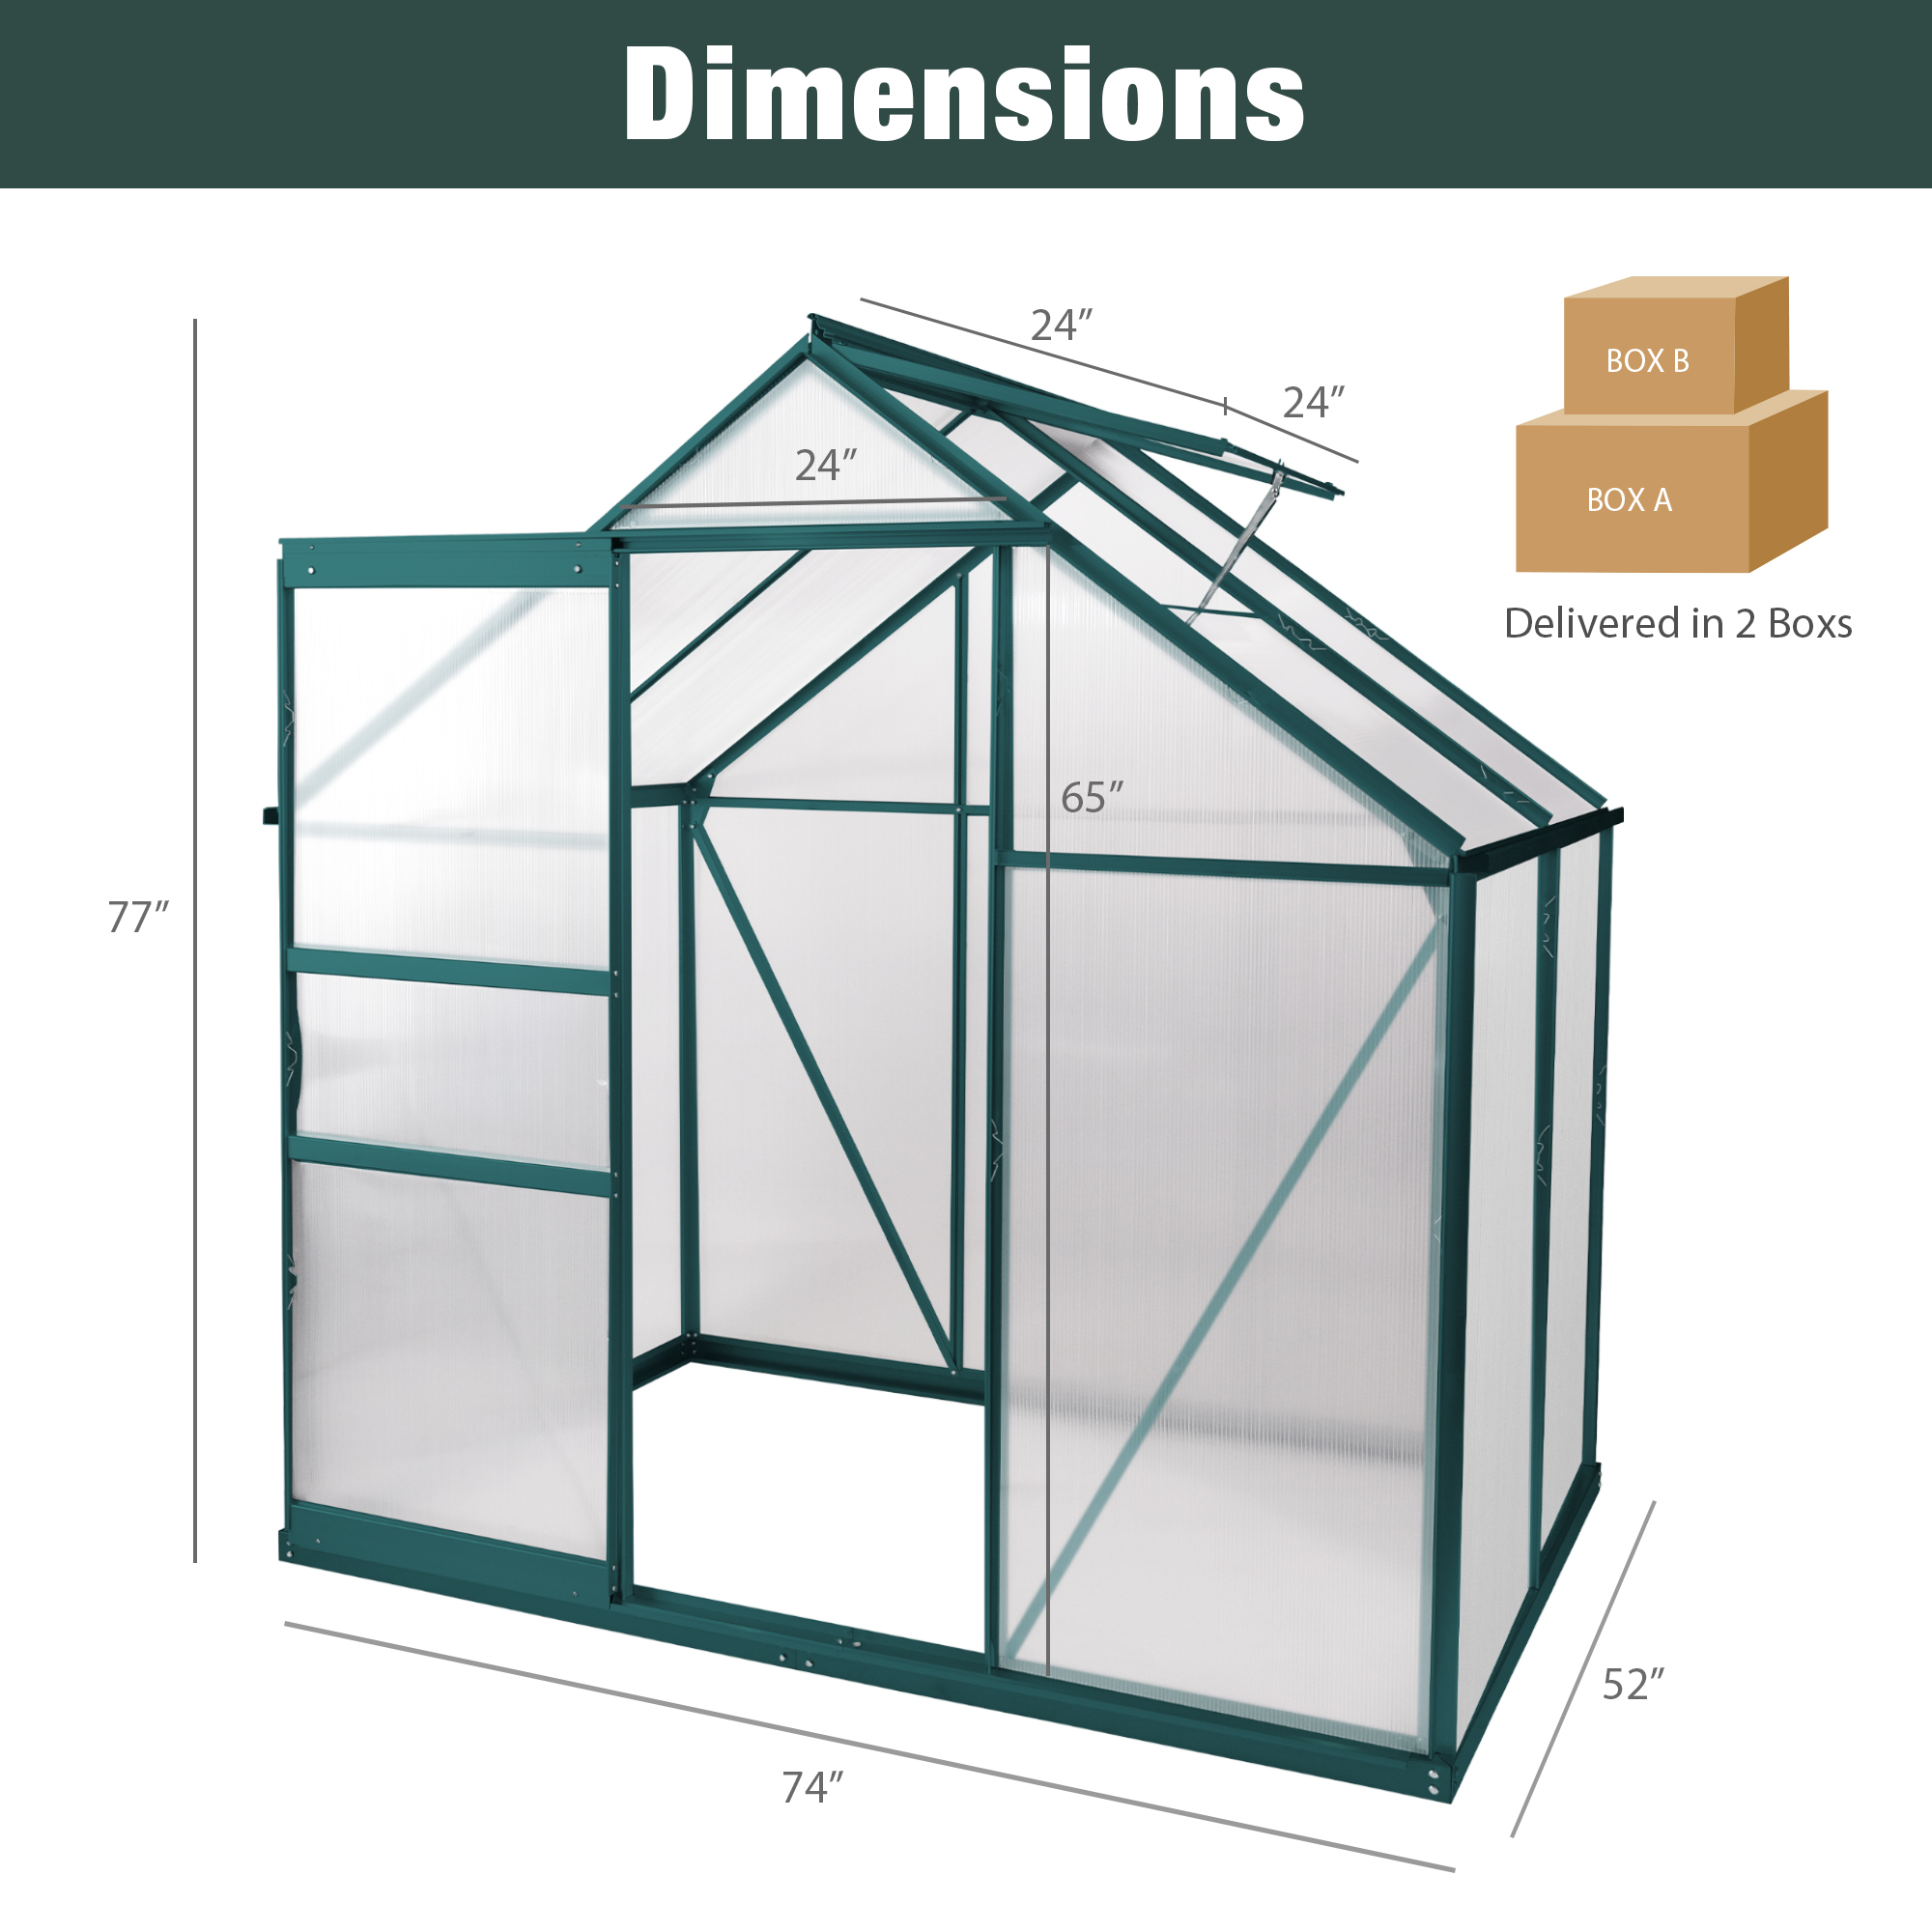 6'X 4' Walk-In Greenhouse with Roof Vent and Rain Gutter for Outside,Polycarbonate Aluminum Heavy Duty Greenhouse for Flowers, Vegetables, Plants Backyard Garden - image 4 of 7